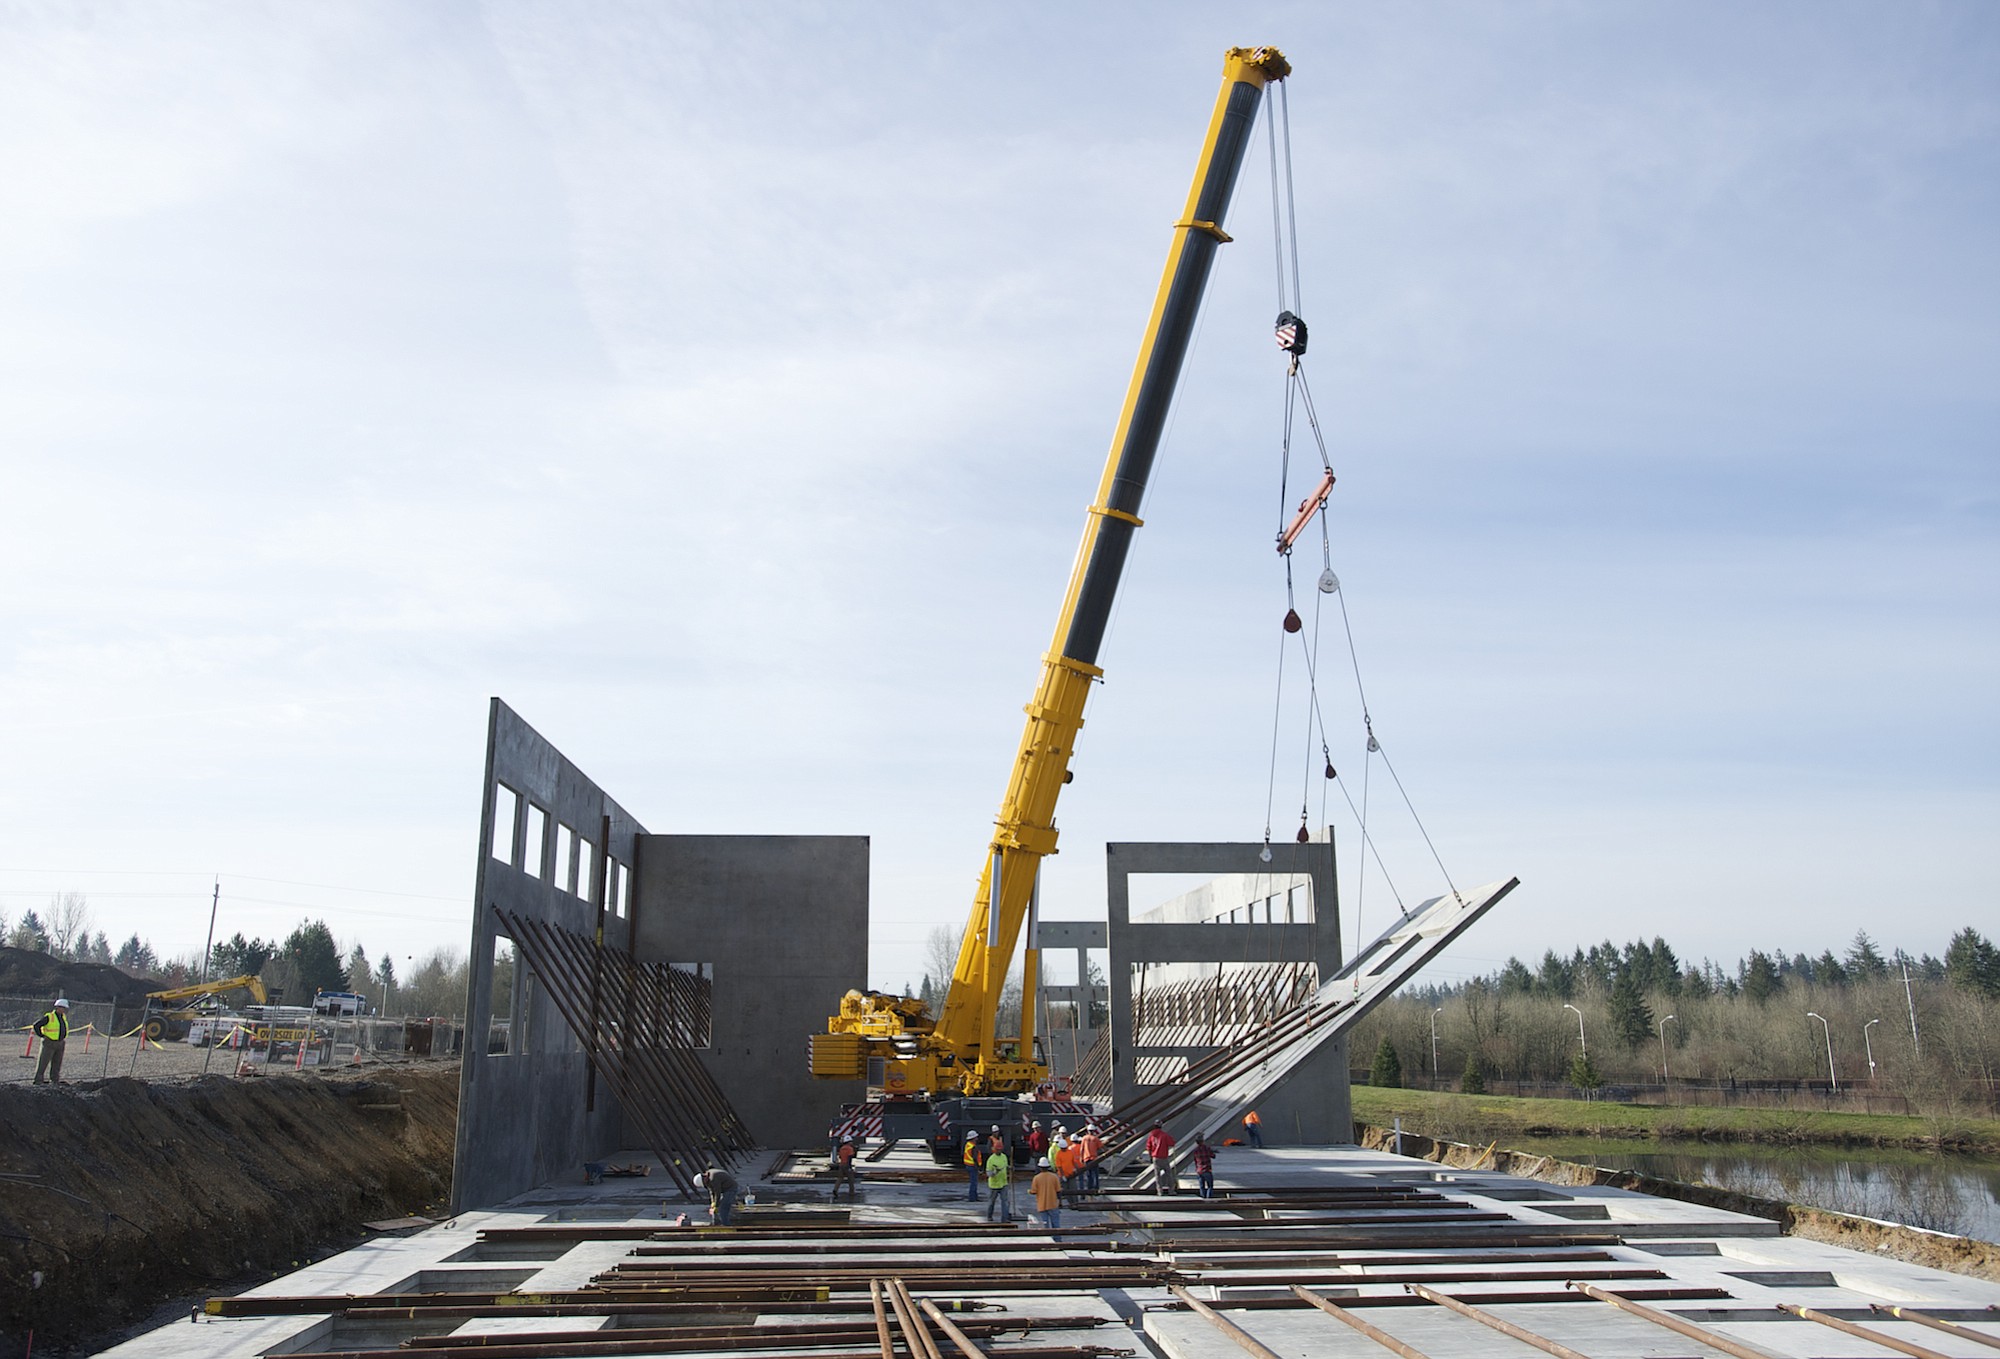 A 600-ton hydraulic crane makes for light work lifting large tilt-up concrete walls at the Dwyer Creek Business Center in Camas on Tuesday.